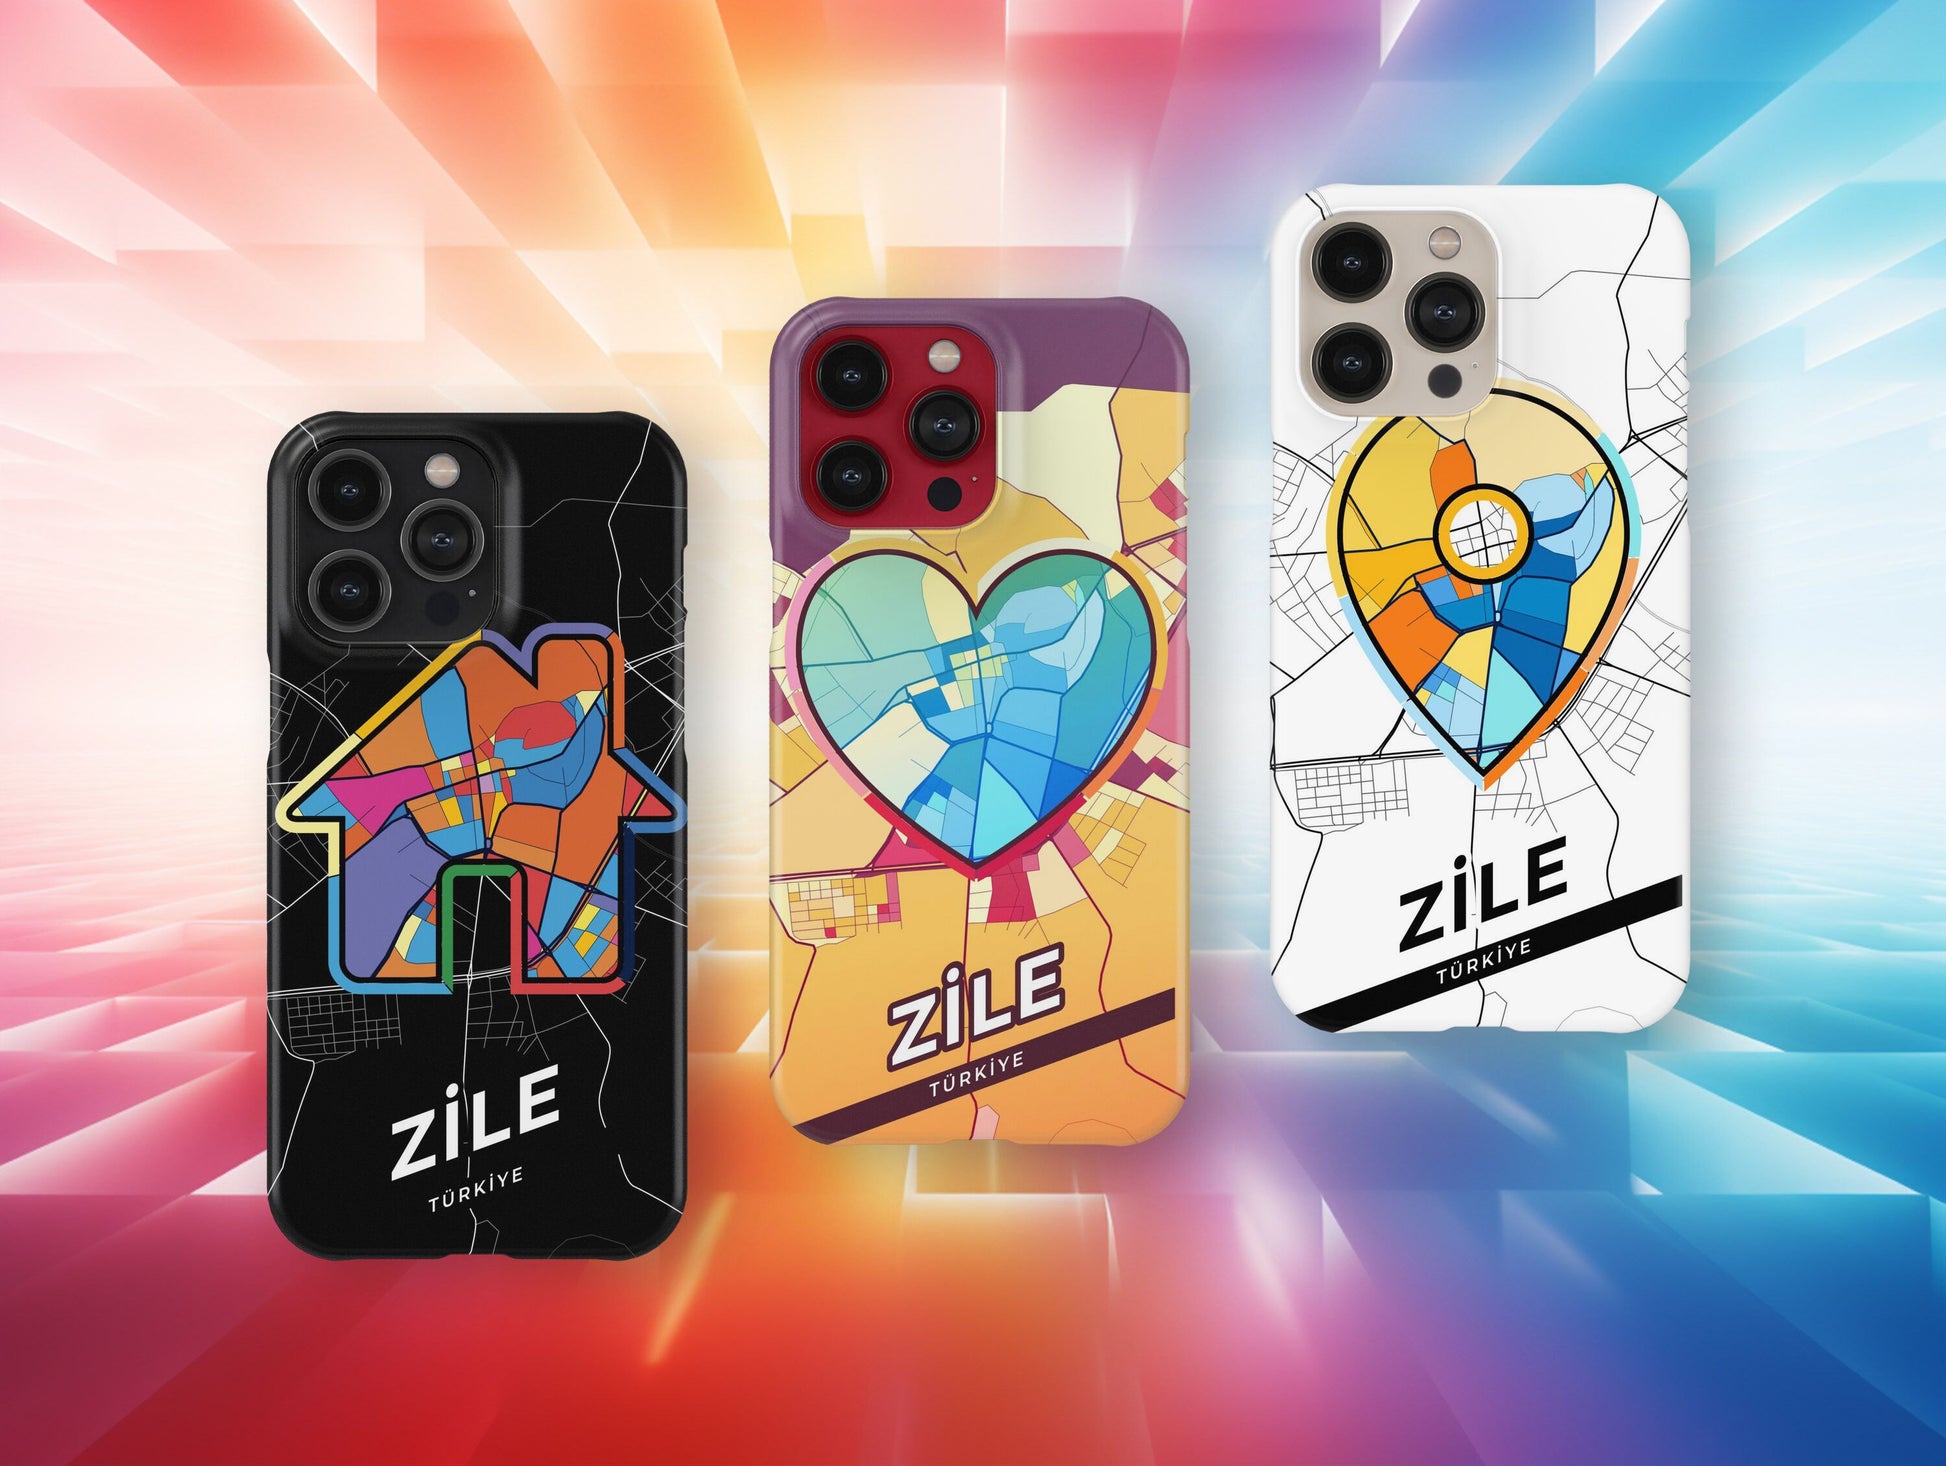 Zile Turkey slim phone case with colorful icon